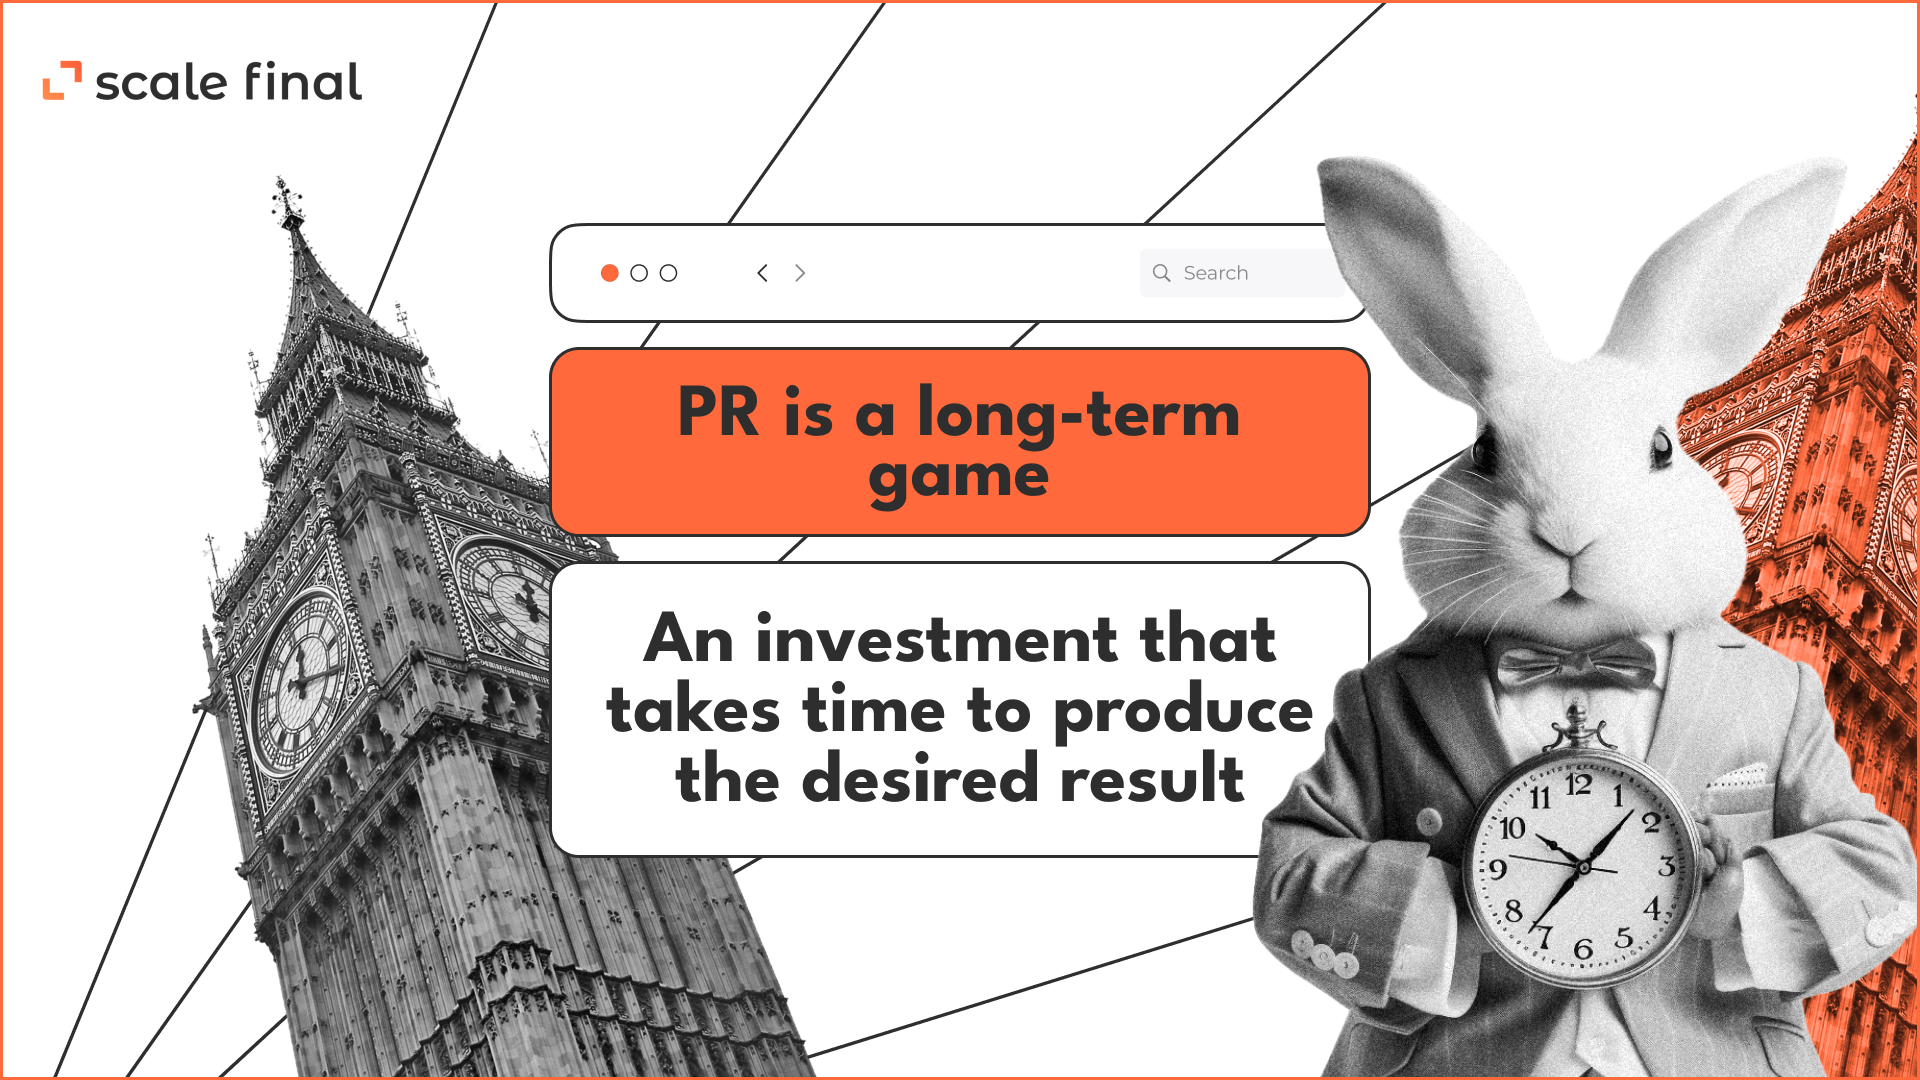 PR is a long-term game. An investment that takes time to produce the desired result.